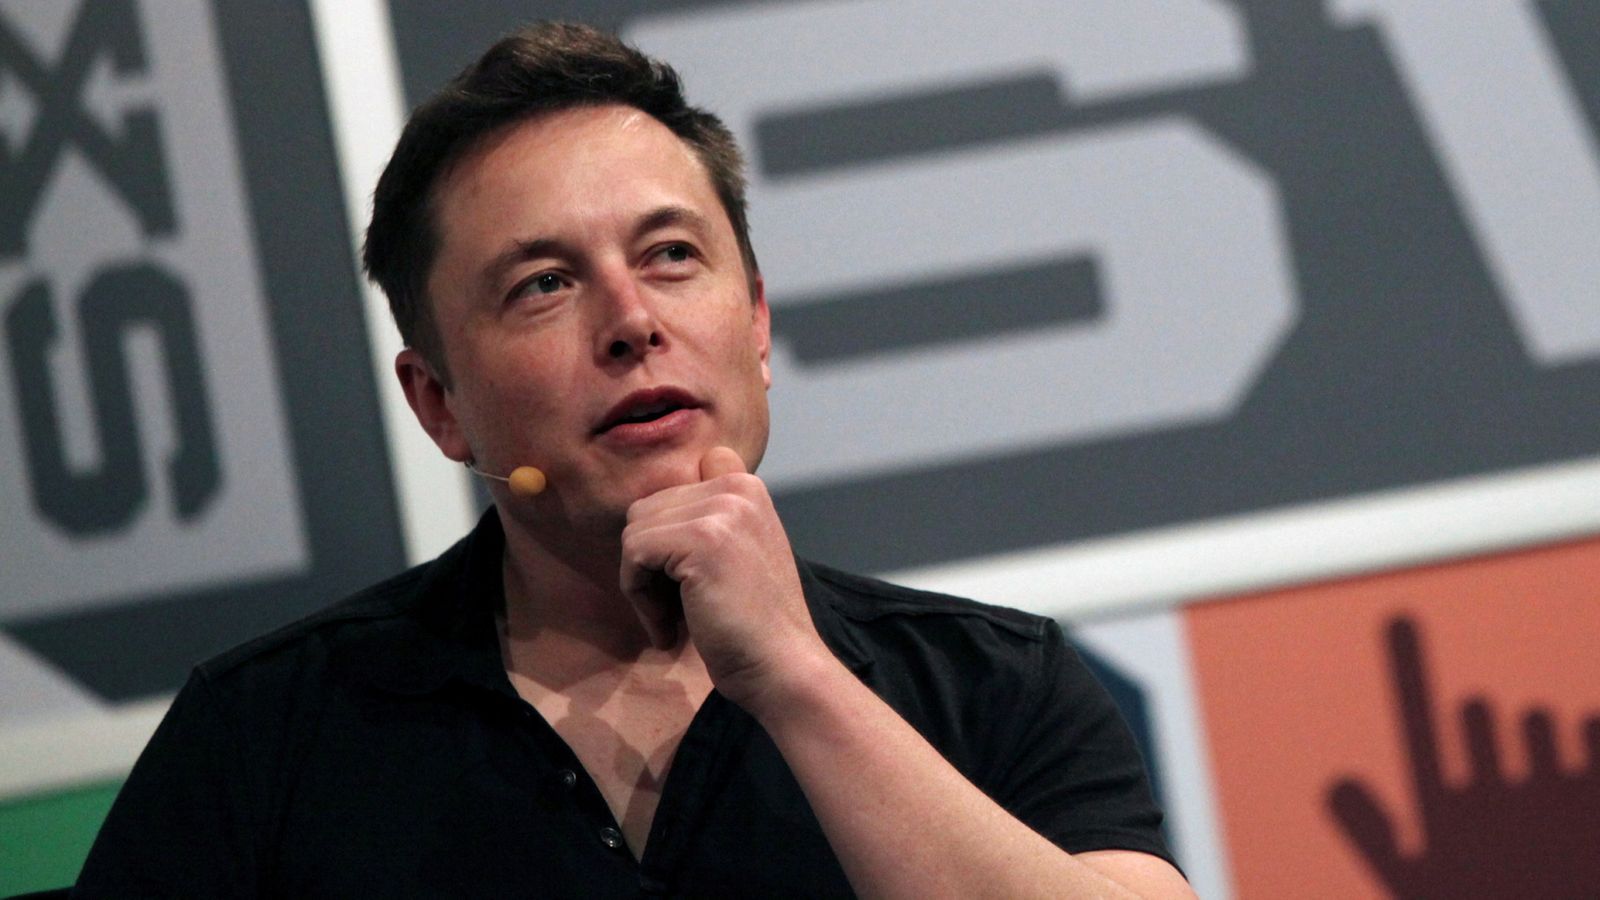 Elon Musk and Tesla accuse regulators of trying to 'chill' free speech rights